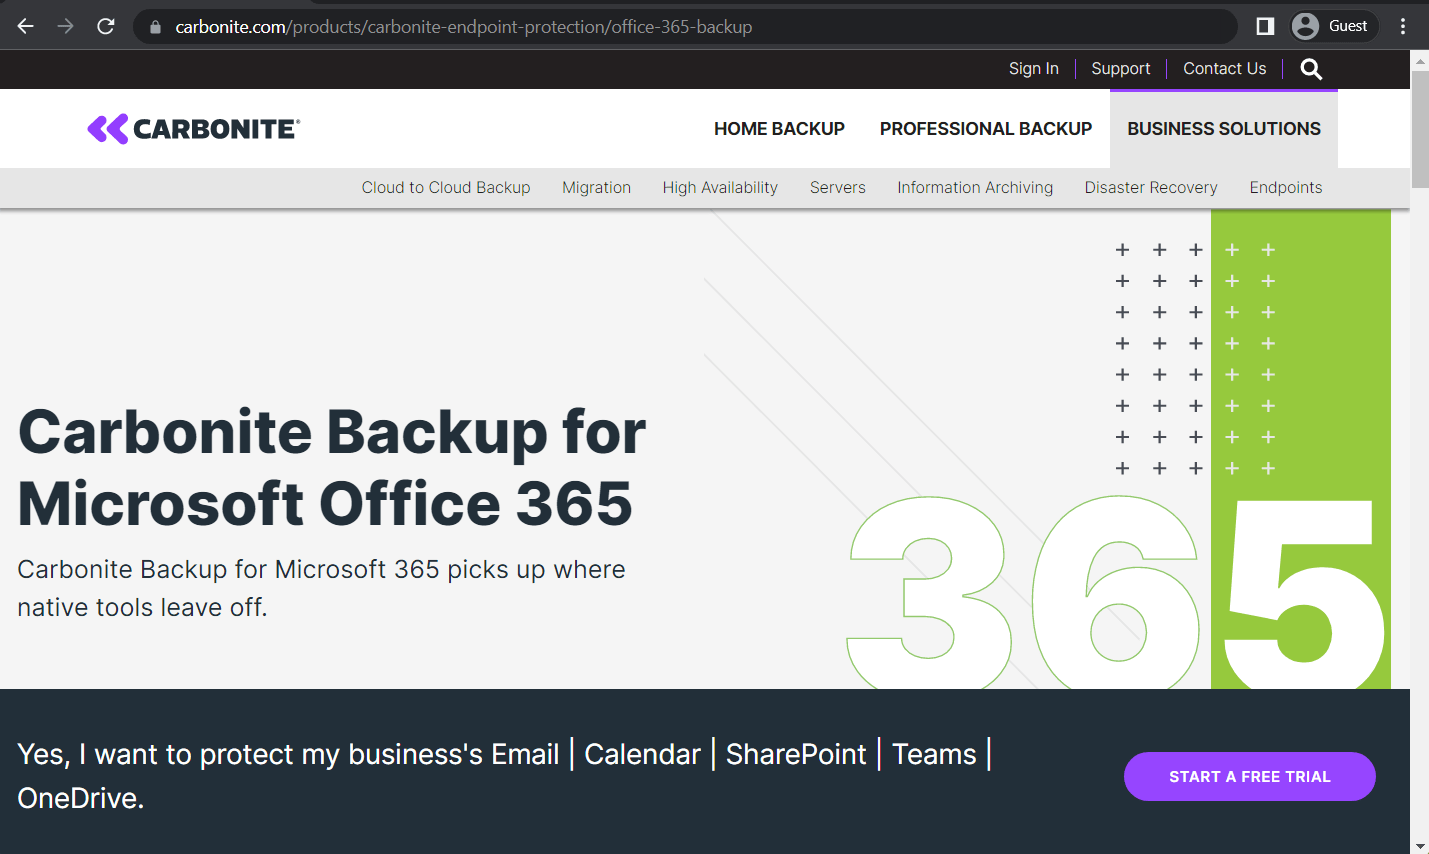 Microsoft 365 (Formerly Office 365) office suite review